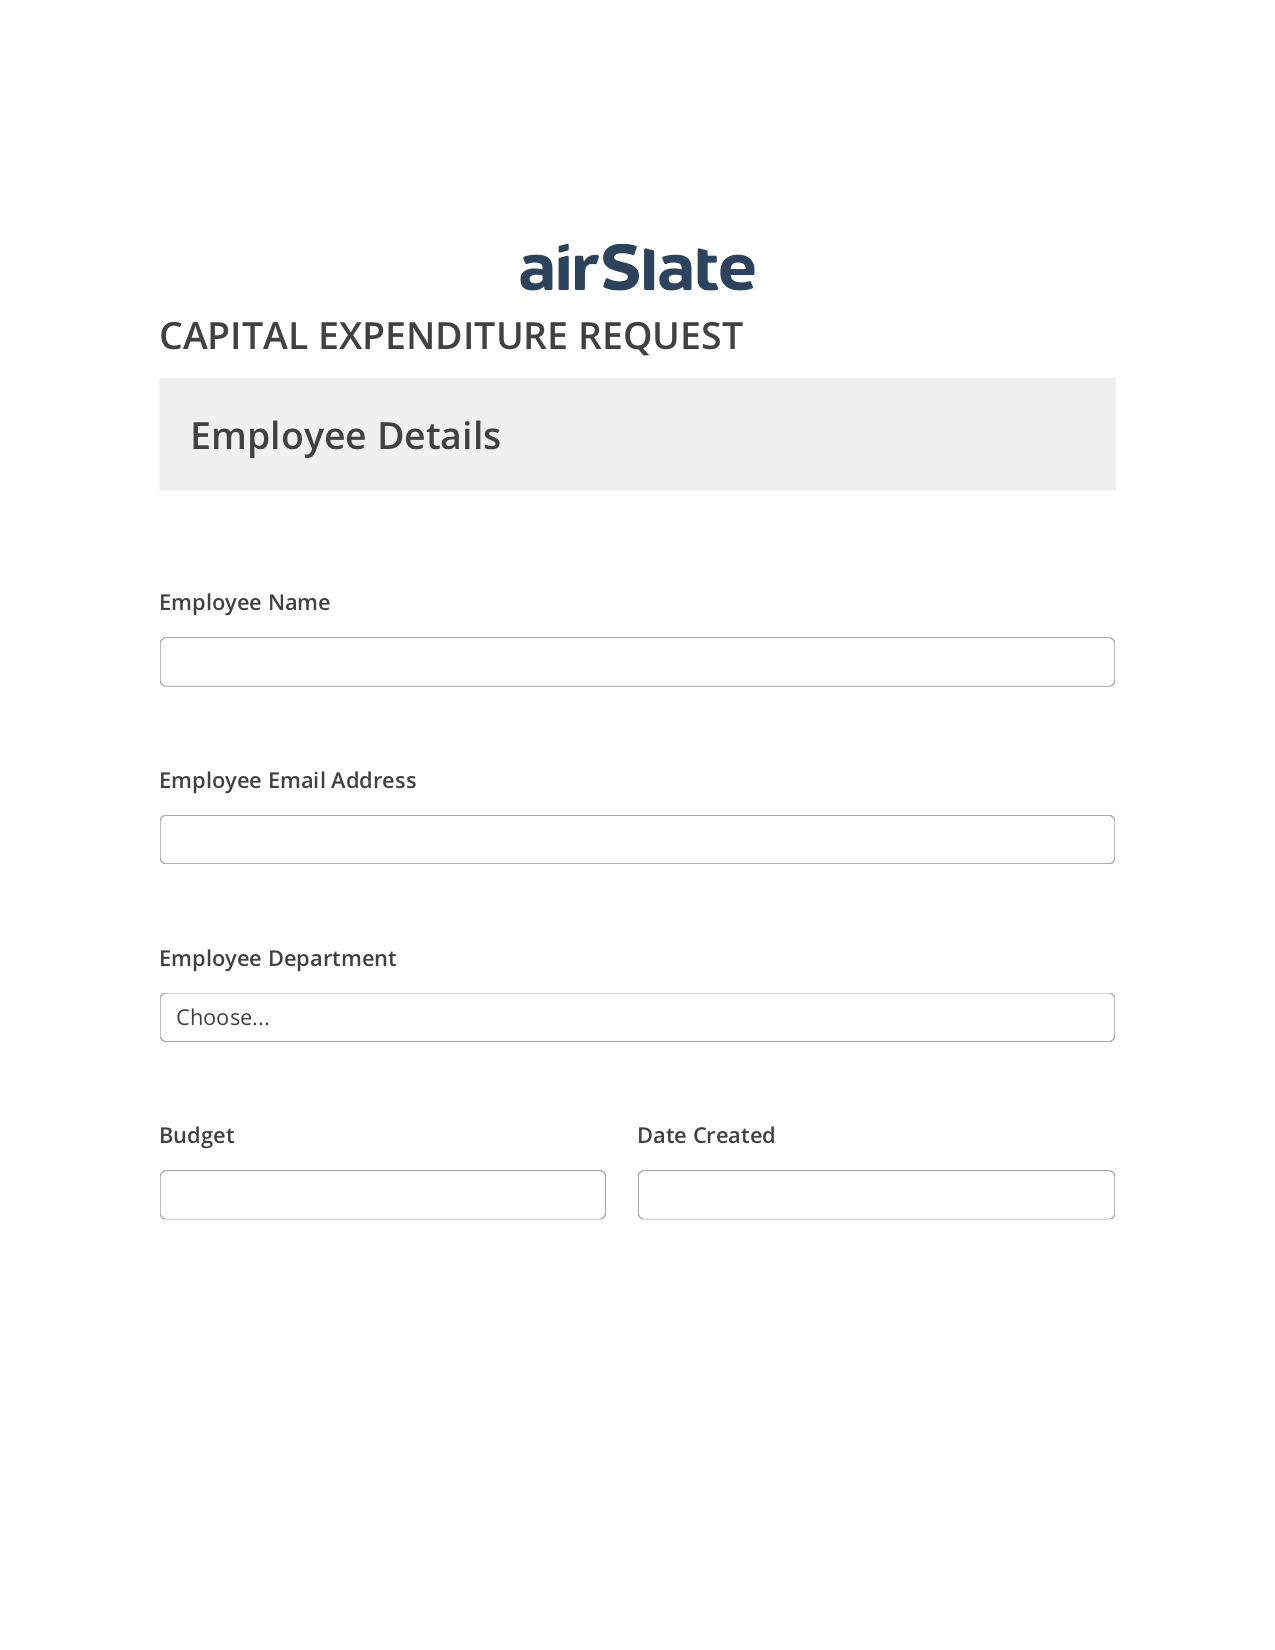 Capital Expenditure Request Approval Workflow System Bot - Slack Two-Way Binding Bot, Hide Signatures Bot, Export to NetSuite Bot